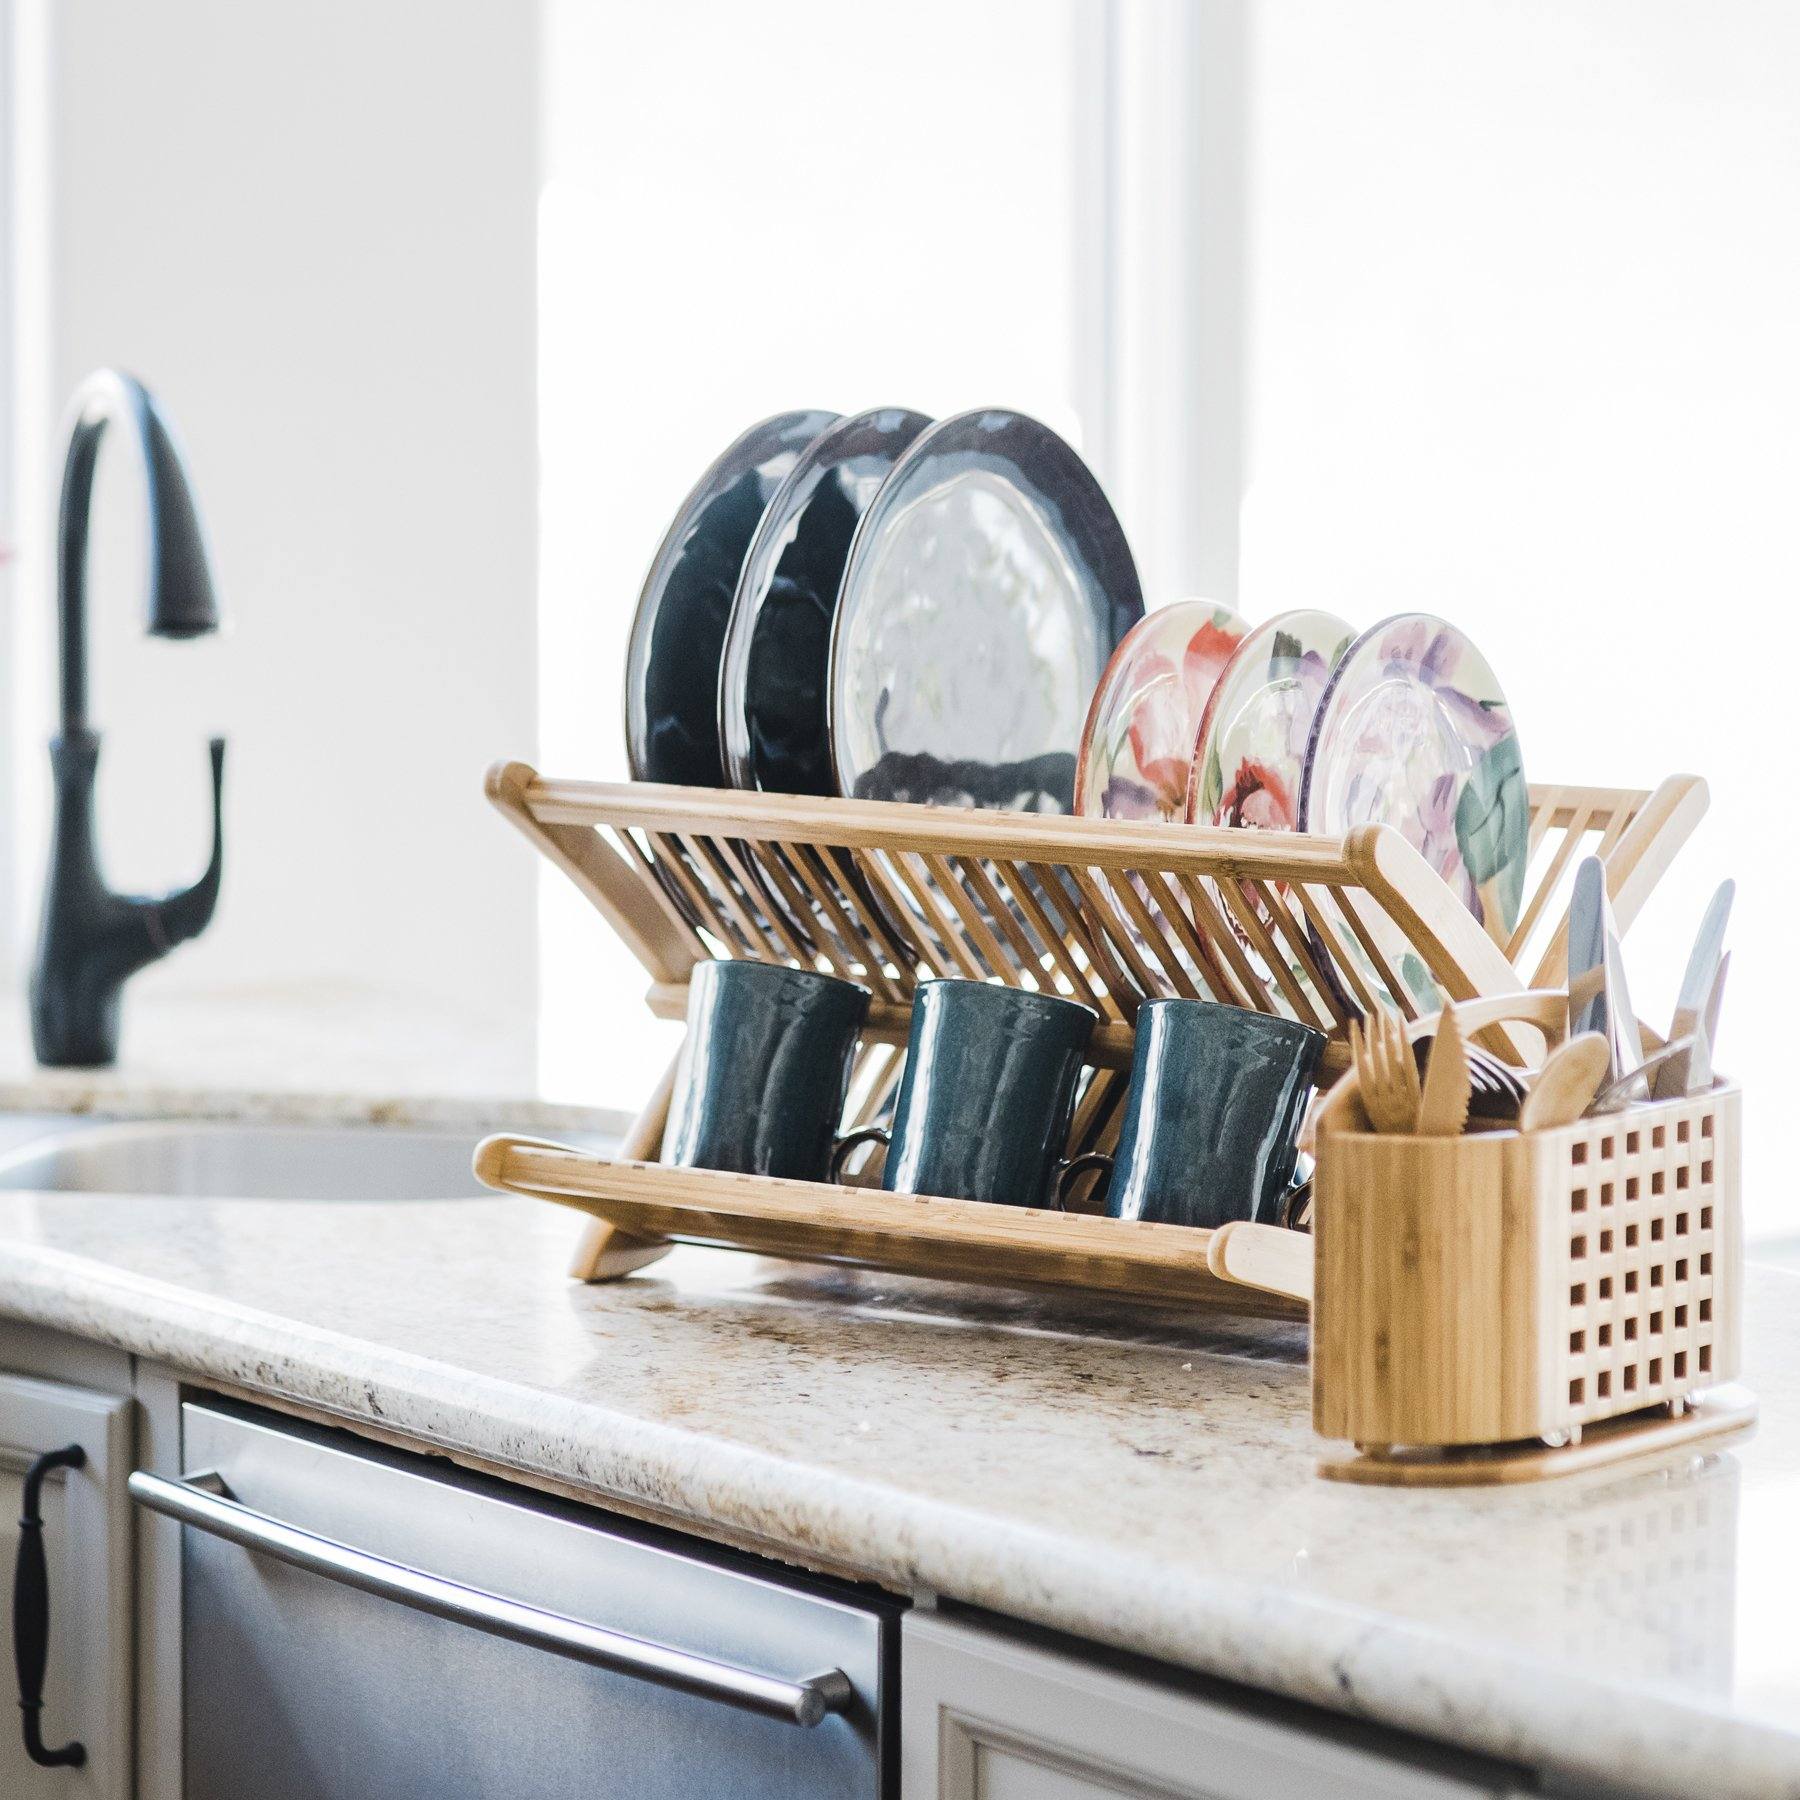 No Dishwasher? These are Our 10 Favorite Dish Drying Racks